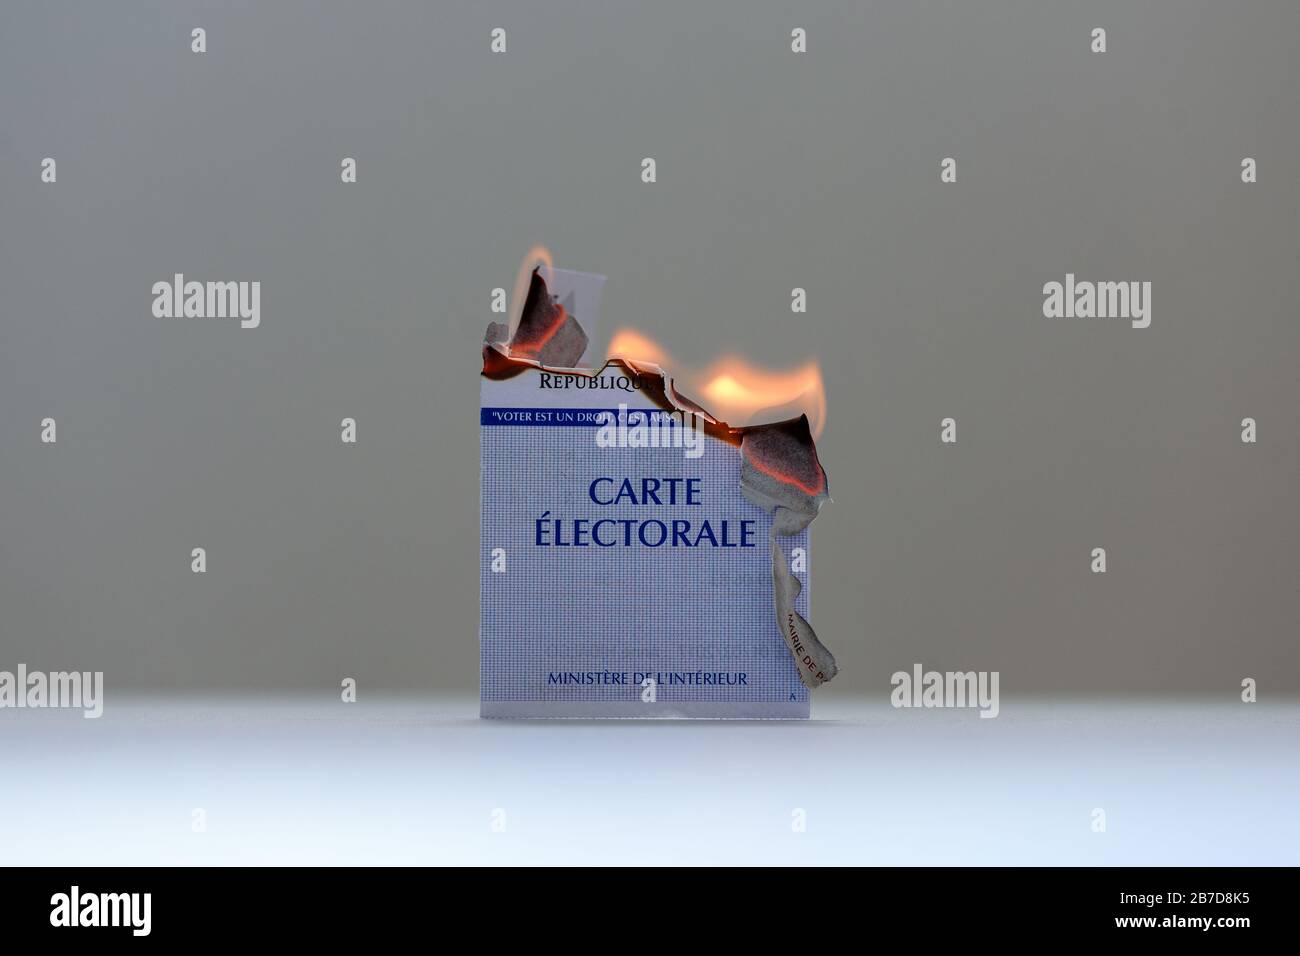 burning official french electoral voter card symbolizing protest and subversion, isolated on grey background, Stock Photo